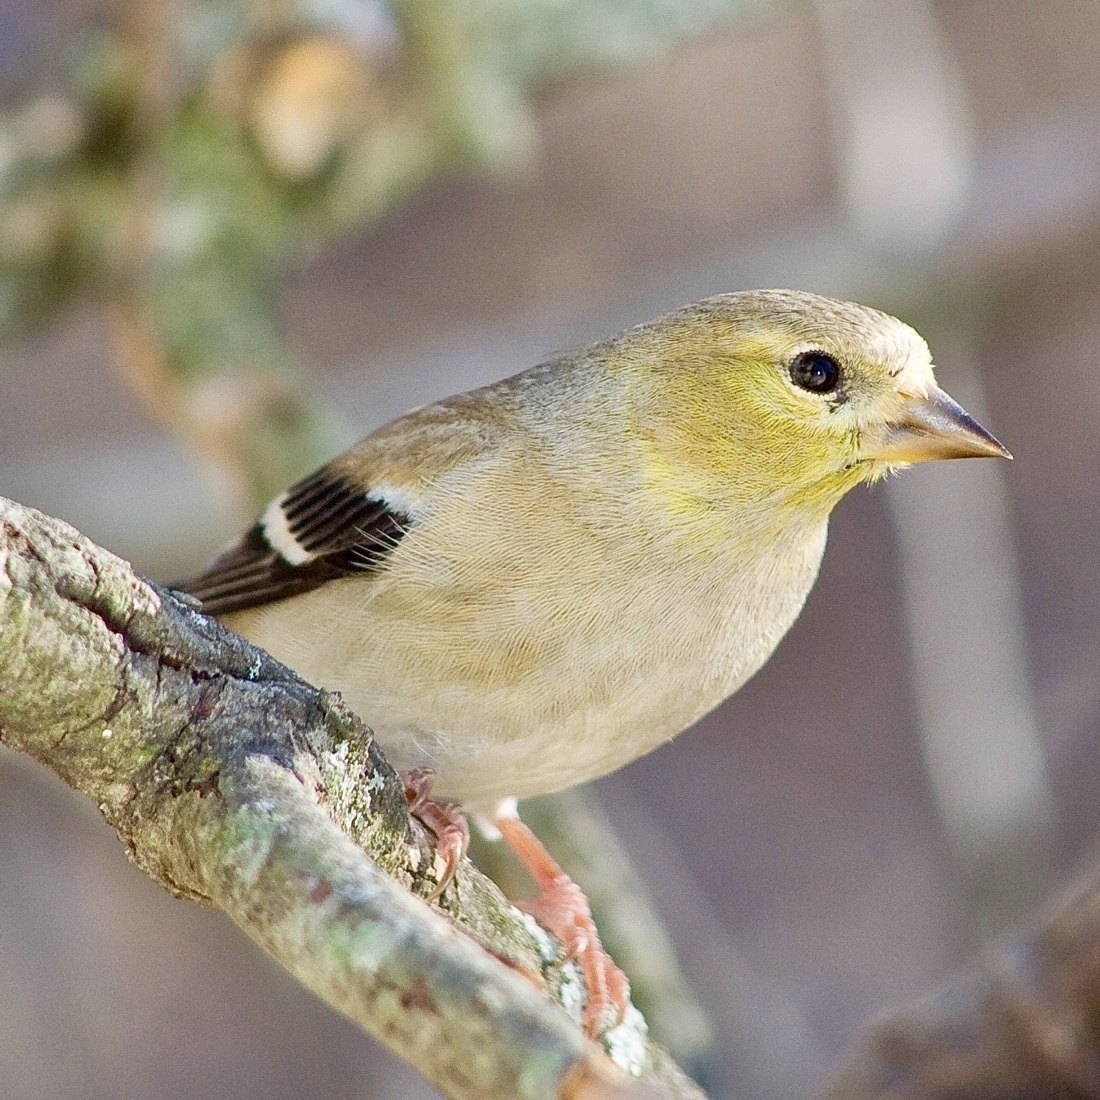 A yellow gray bird perches on a branch set against a blurred winter background